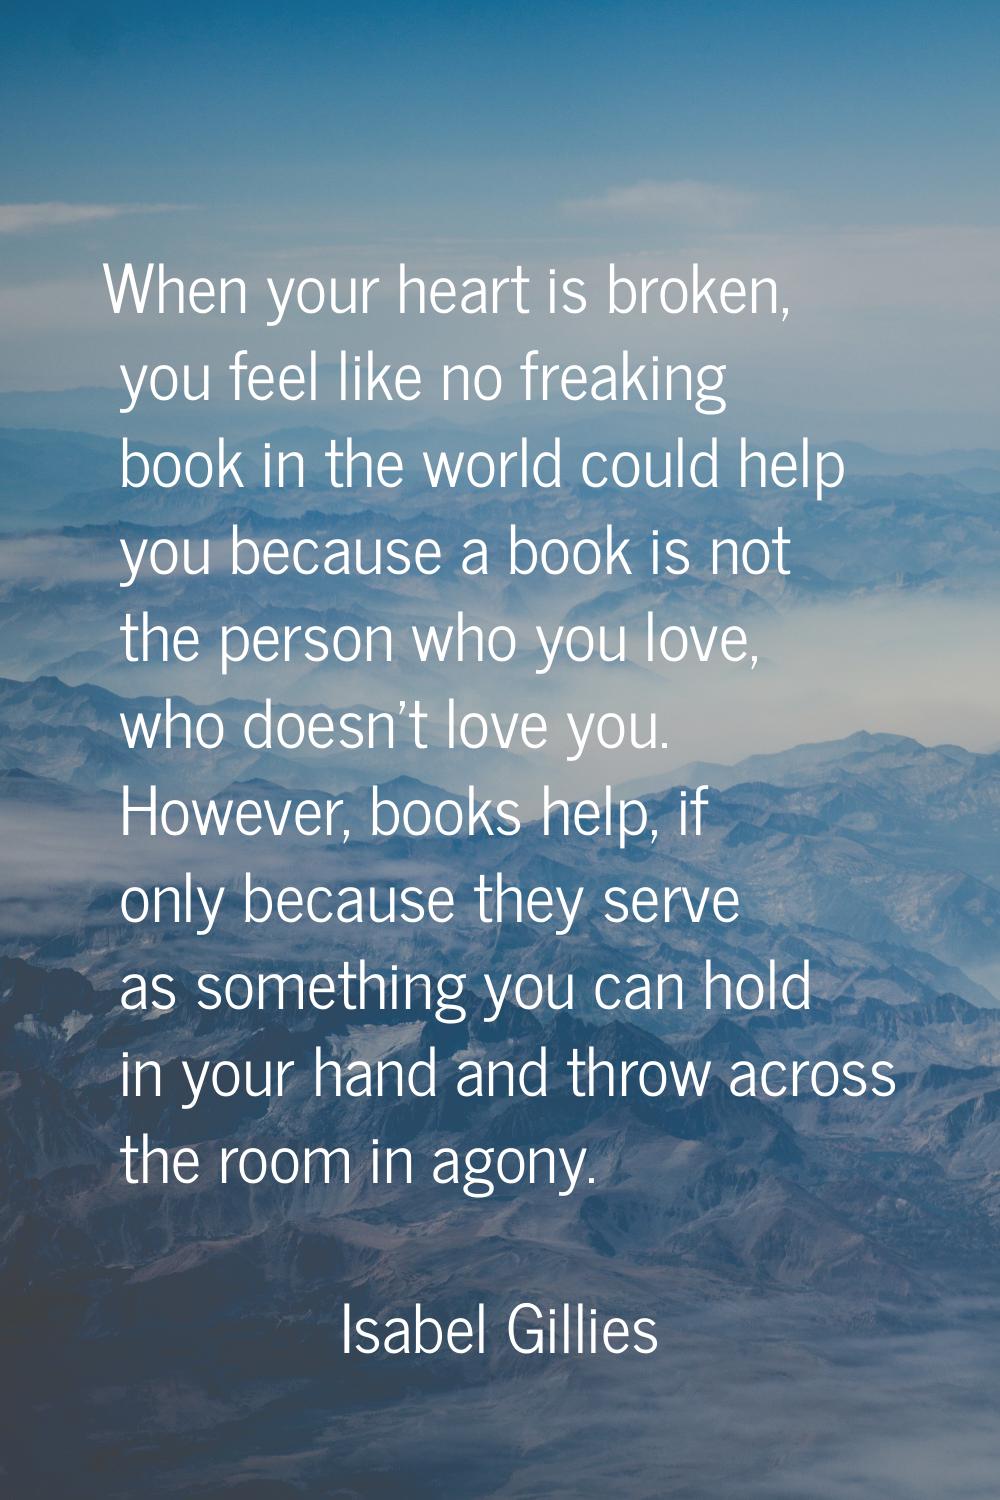 When your heart is broken, you feel like no freaking book in the world could help you because a boo